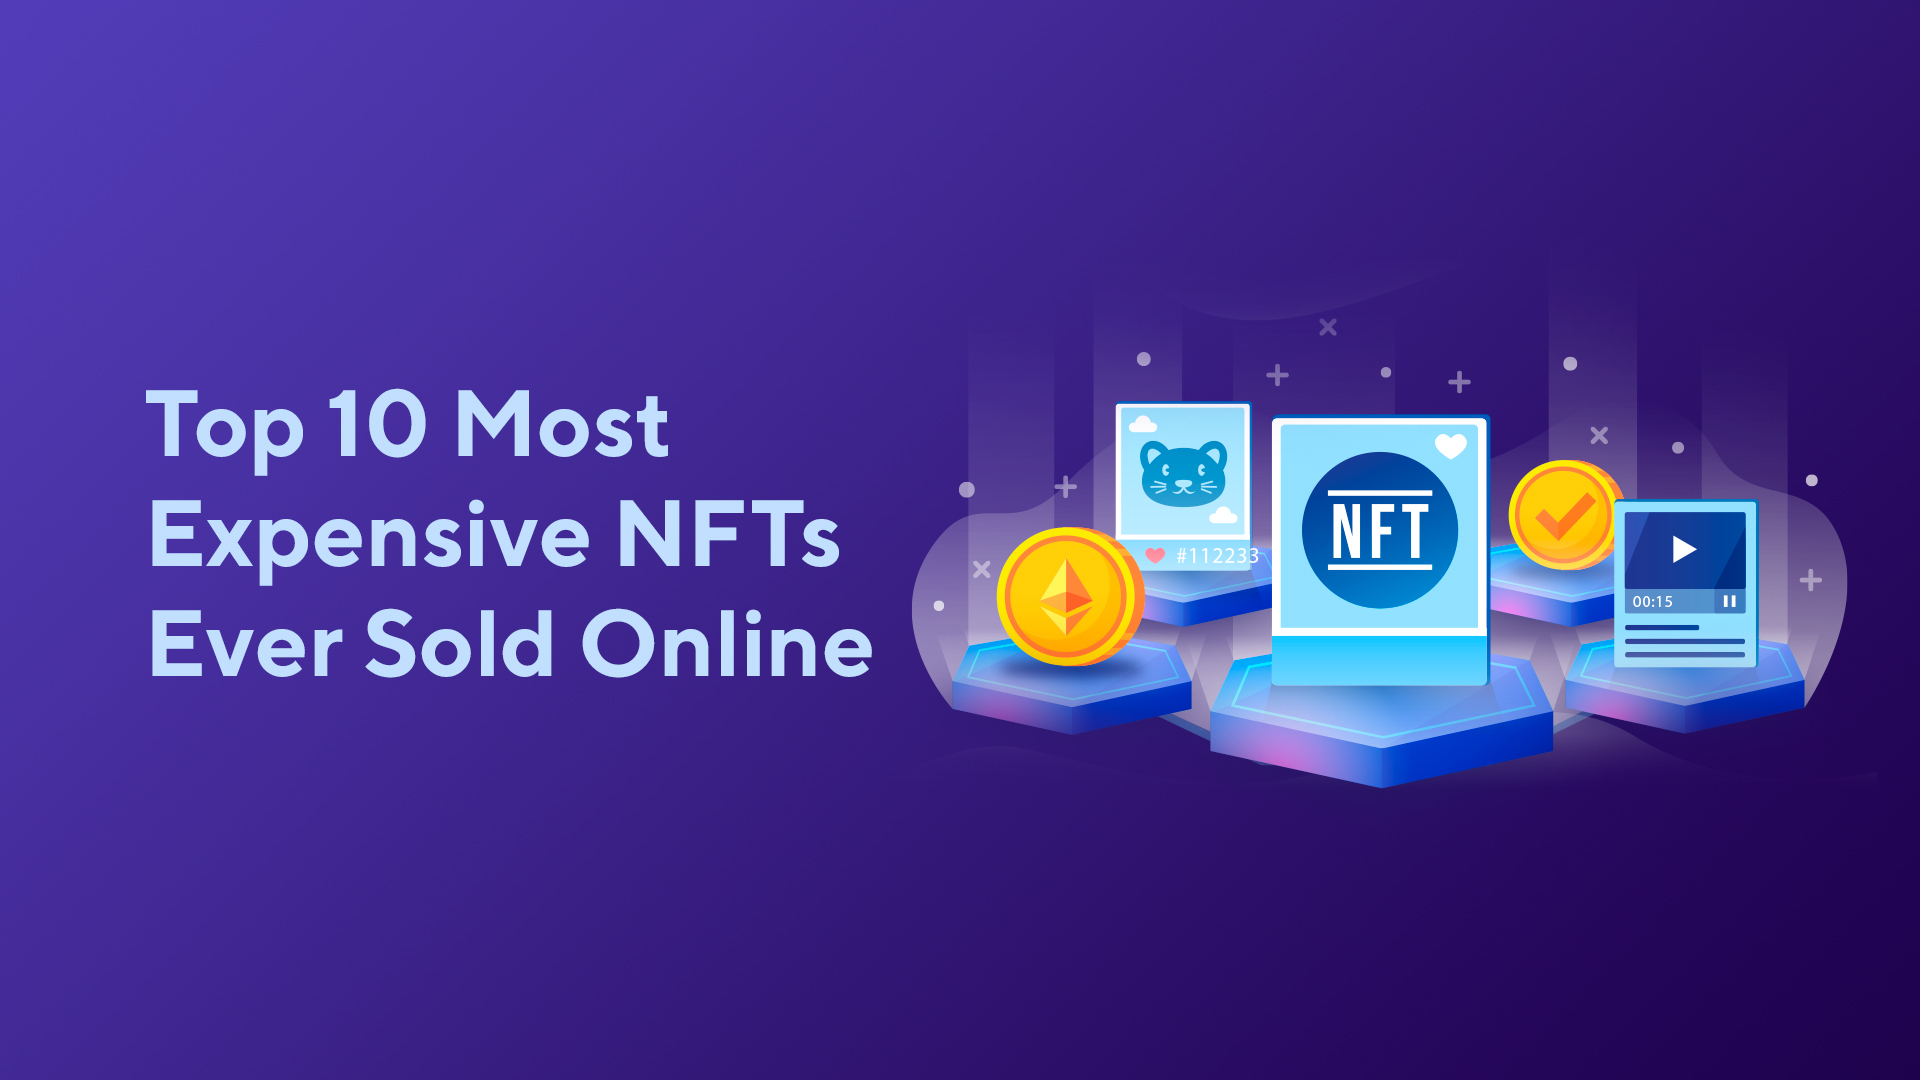 Top 10 Most Expensive NFTs Ever Sold Online